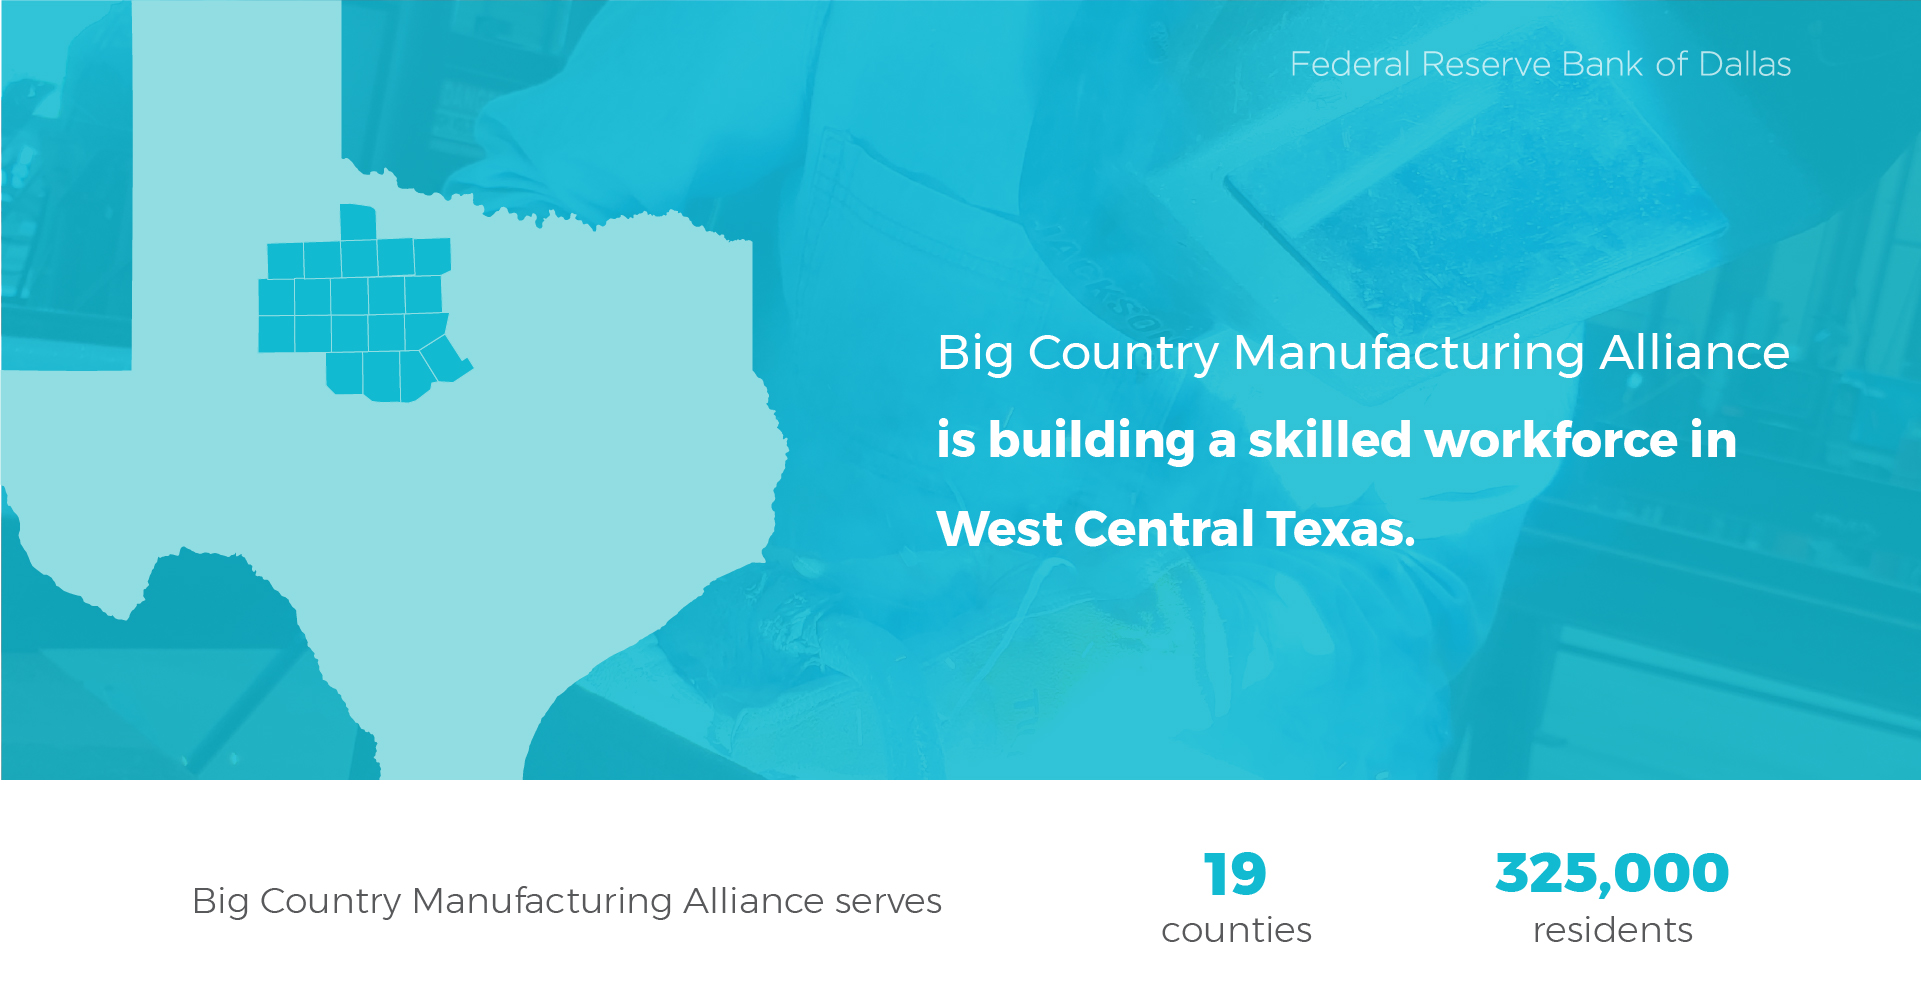 Big Country Manufacturing Alliance